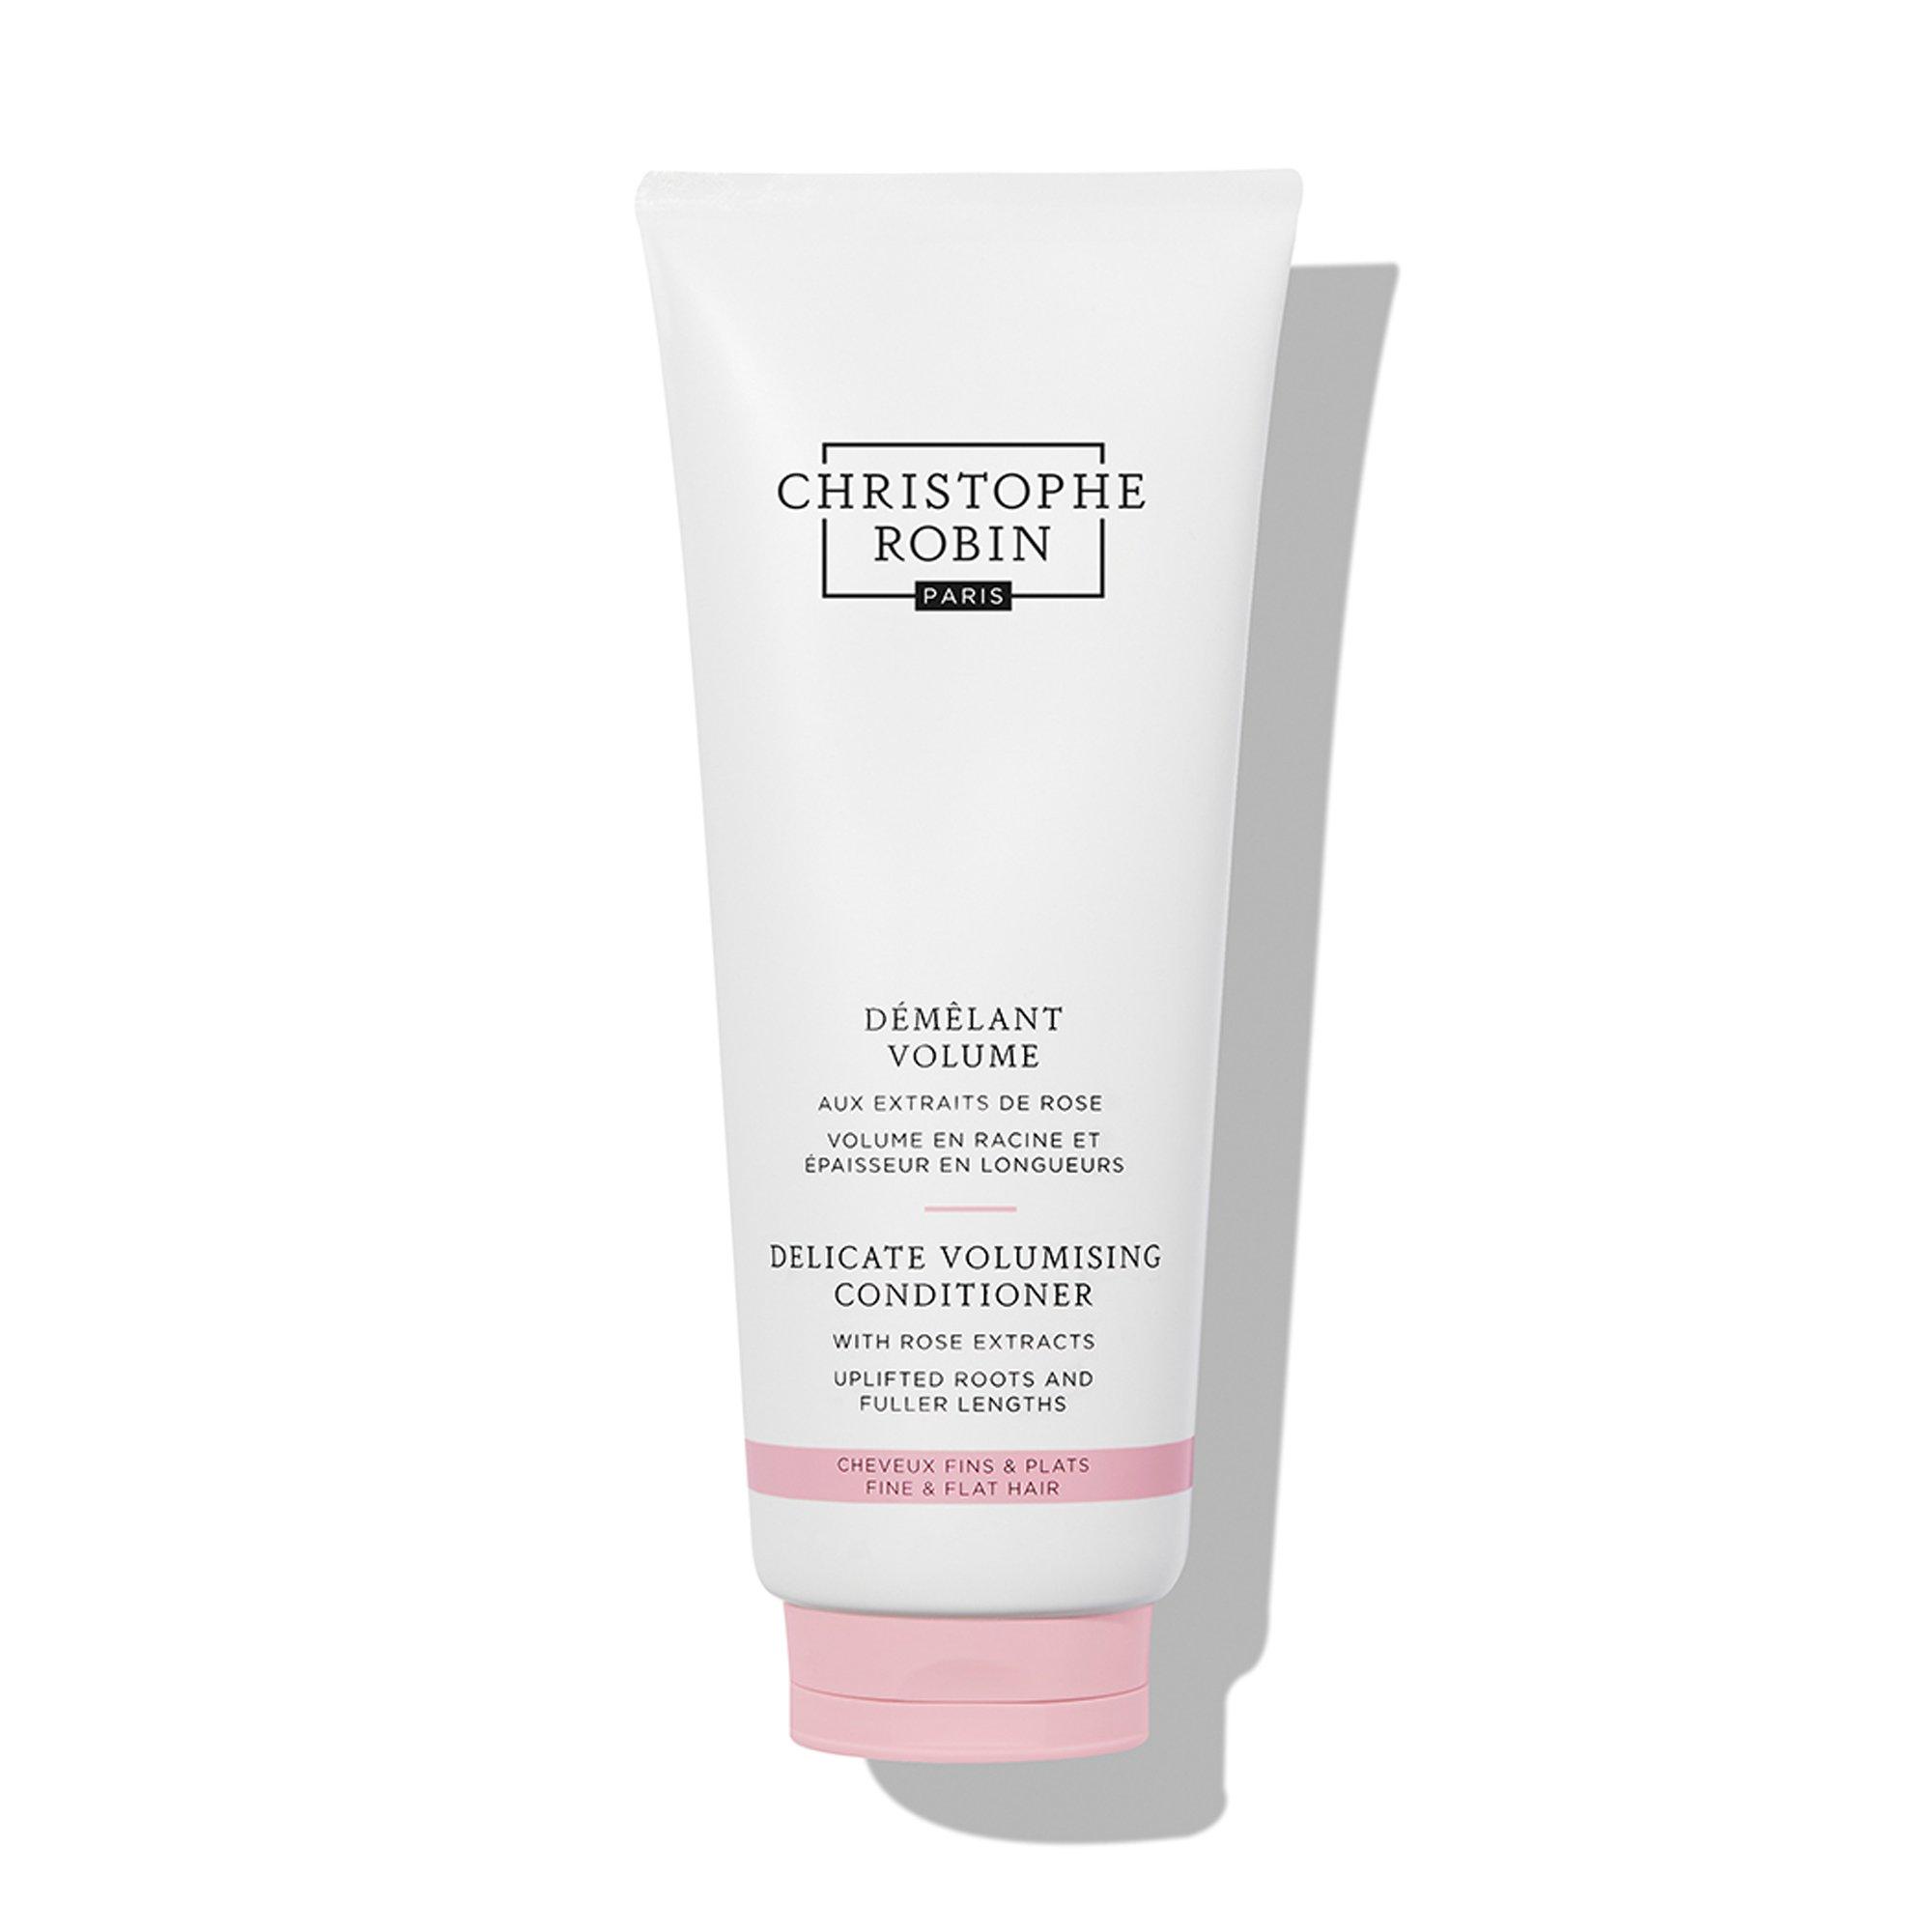 Christophe Robin Delicate Volumising with Rose Extracts Conditioner Démêlant Volume 